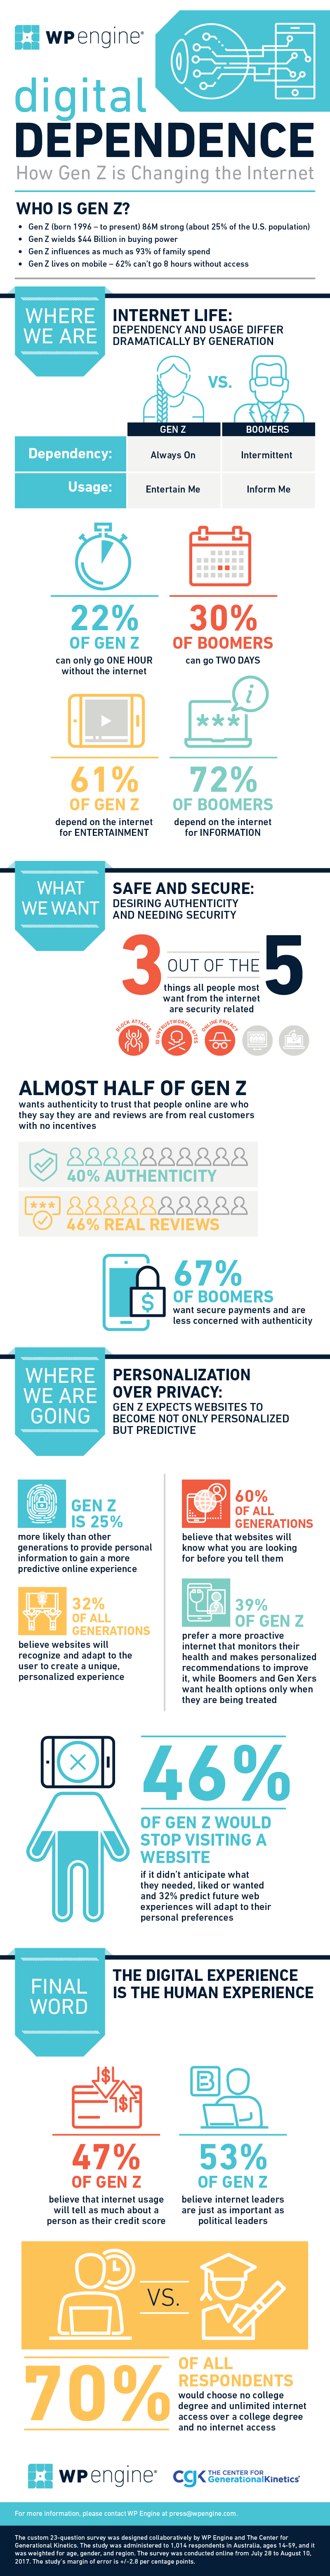 WPE-Infographic-GenZ-AUS.png